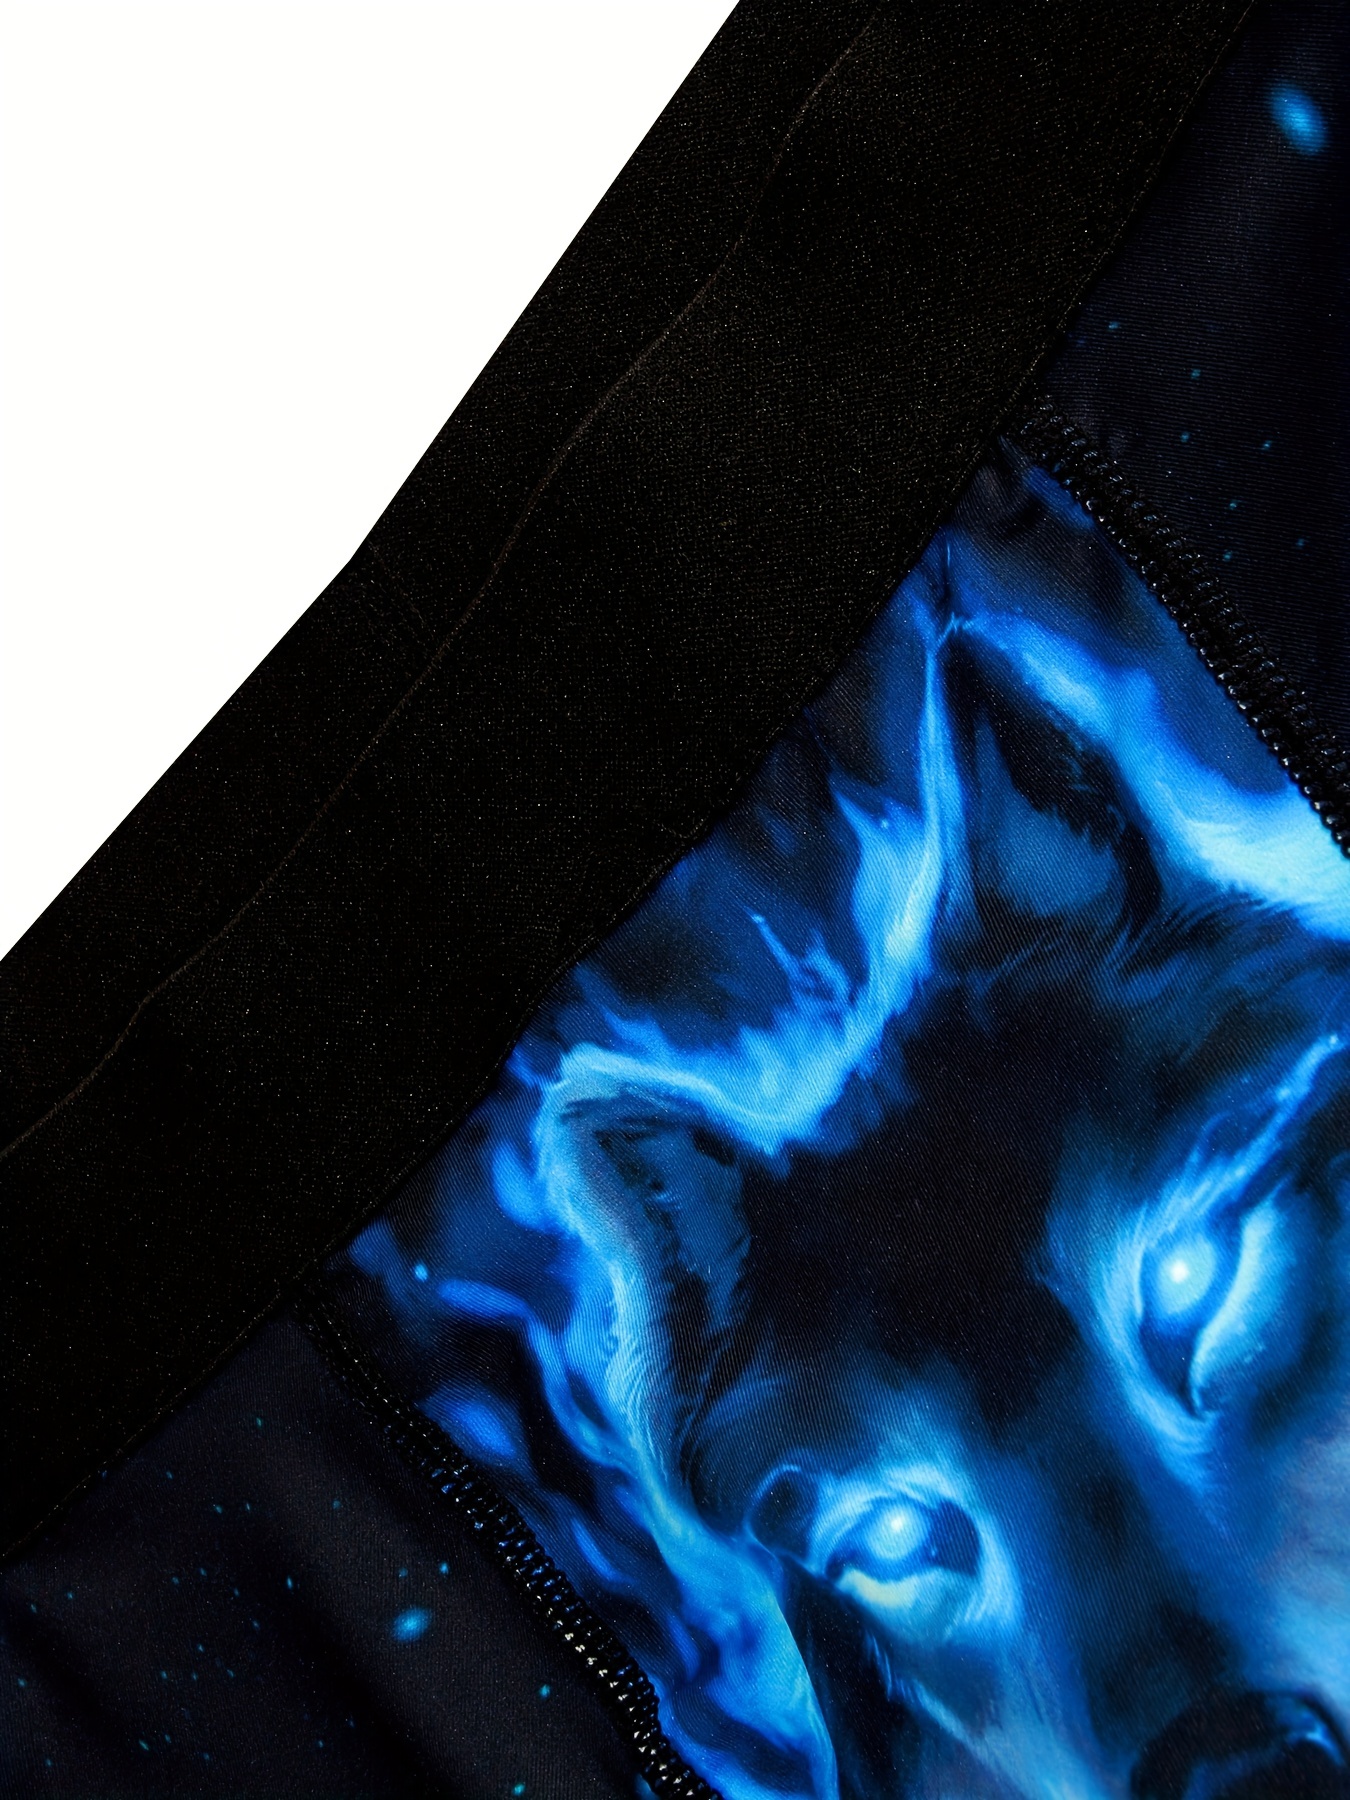 Best Deal for Wolf In Blue Flame Stretchy Fashion Men'S Underwear